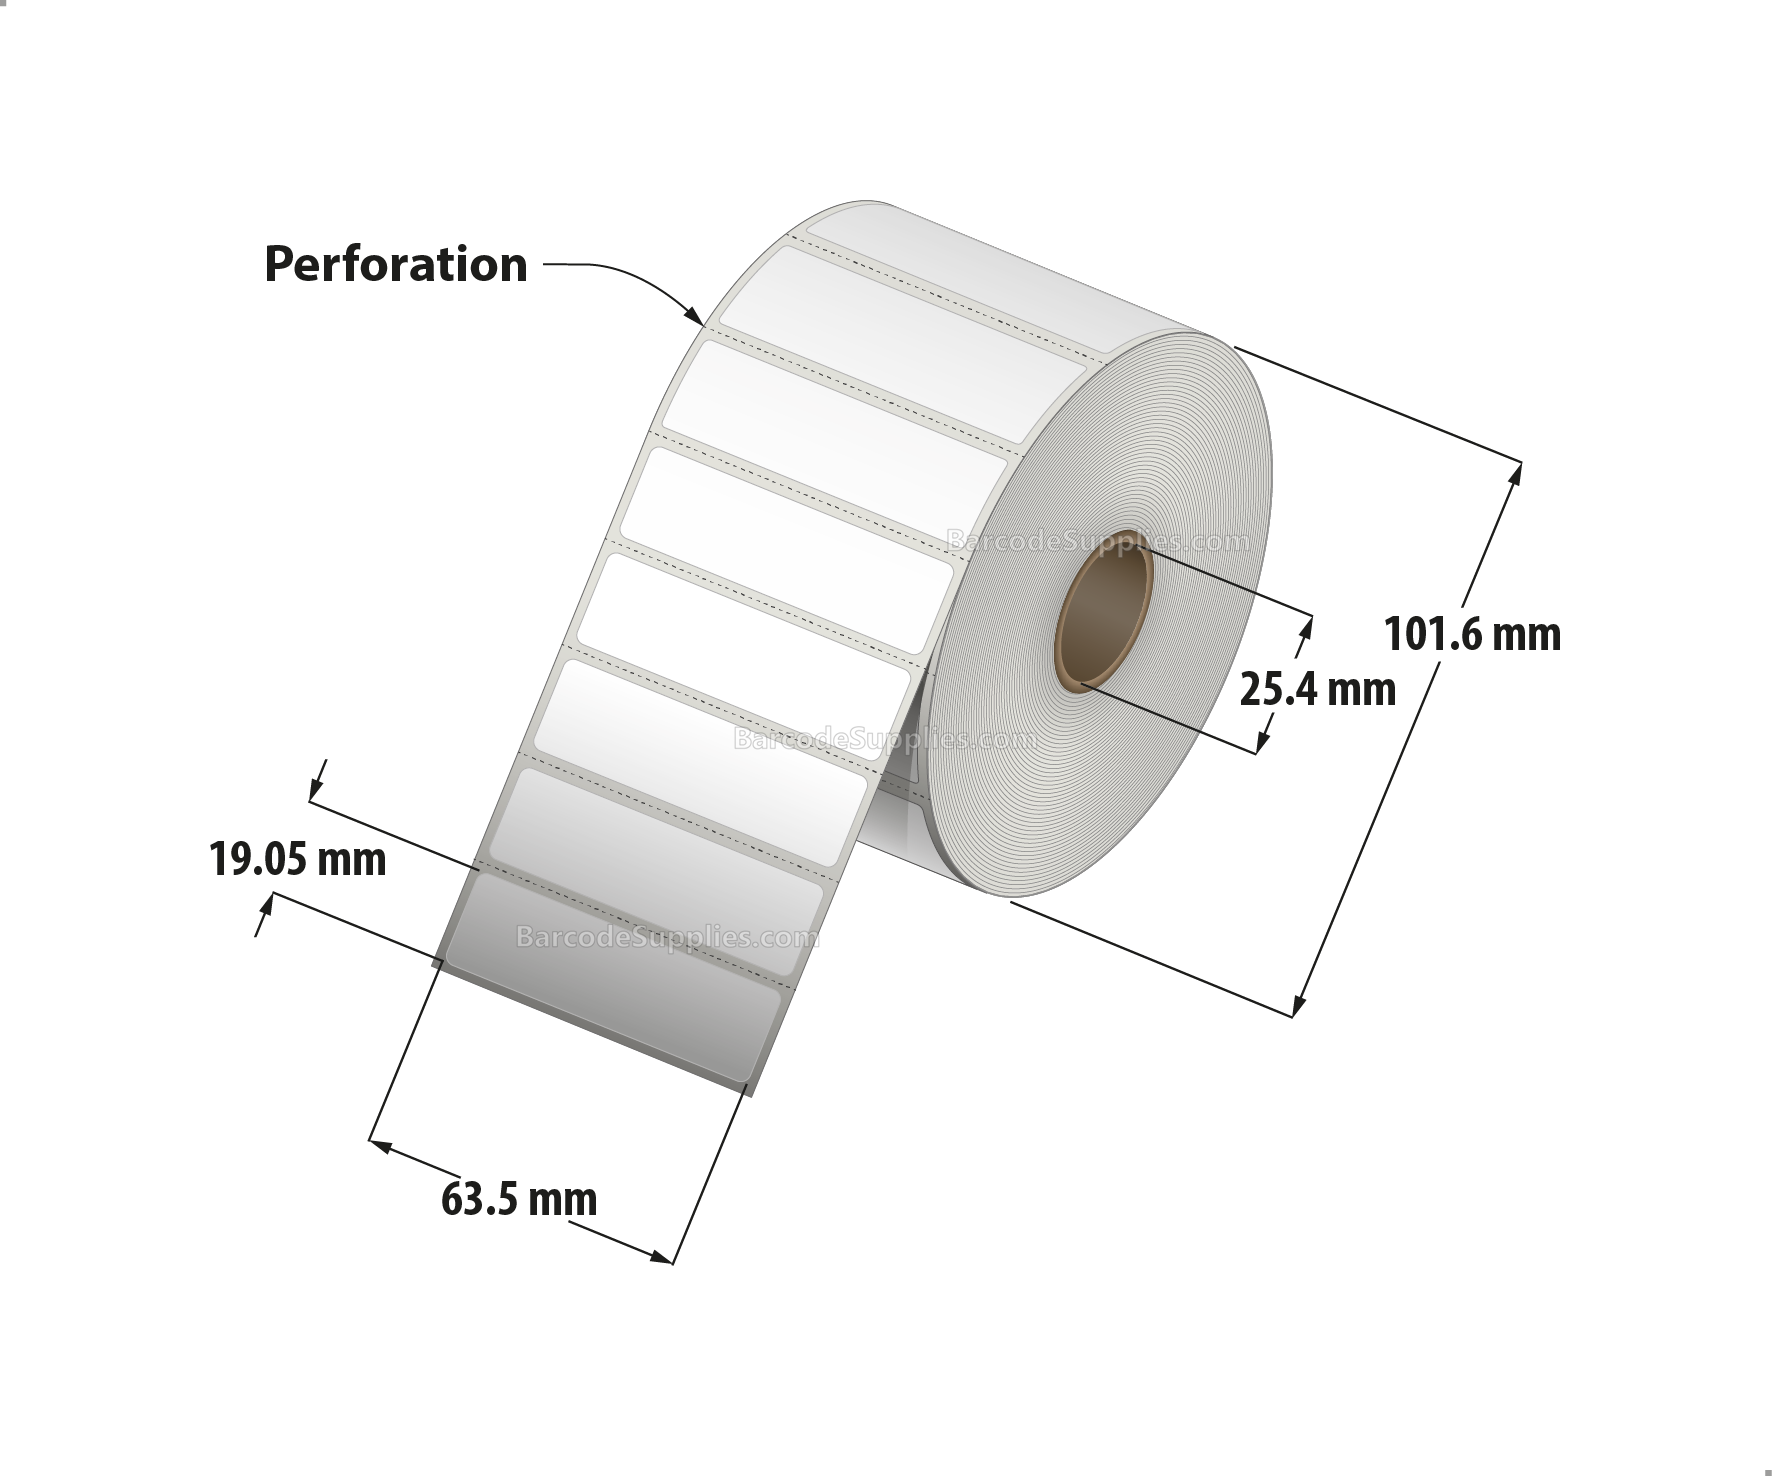 2.5 x 0.75 Direct Thermal White Labels With Acrylic Adhesive - Perforated - 1750 Labels Per Roll - Carton Of 12 Rolls - 21000 Labels Total - MPN: RD-25-075-1750-1